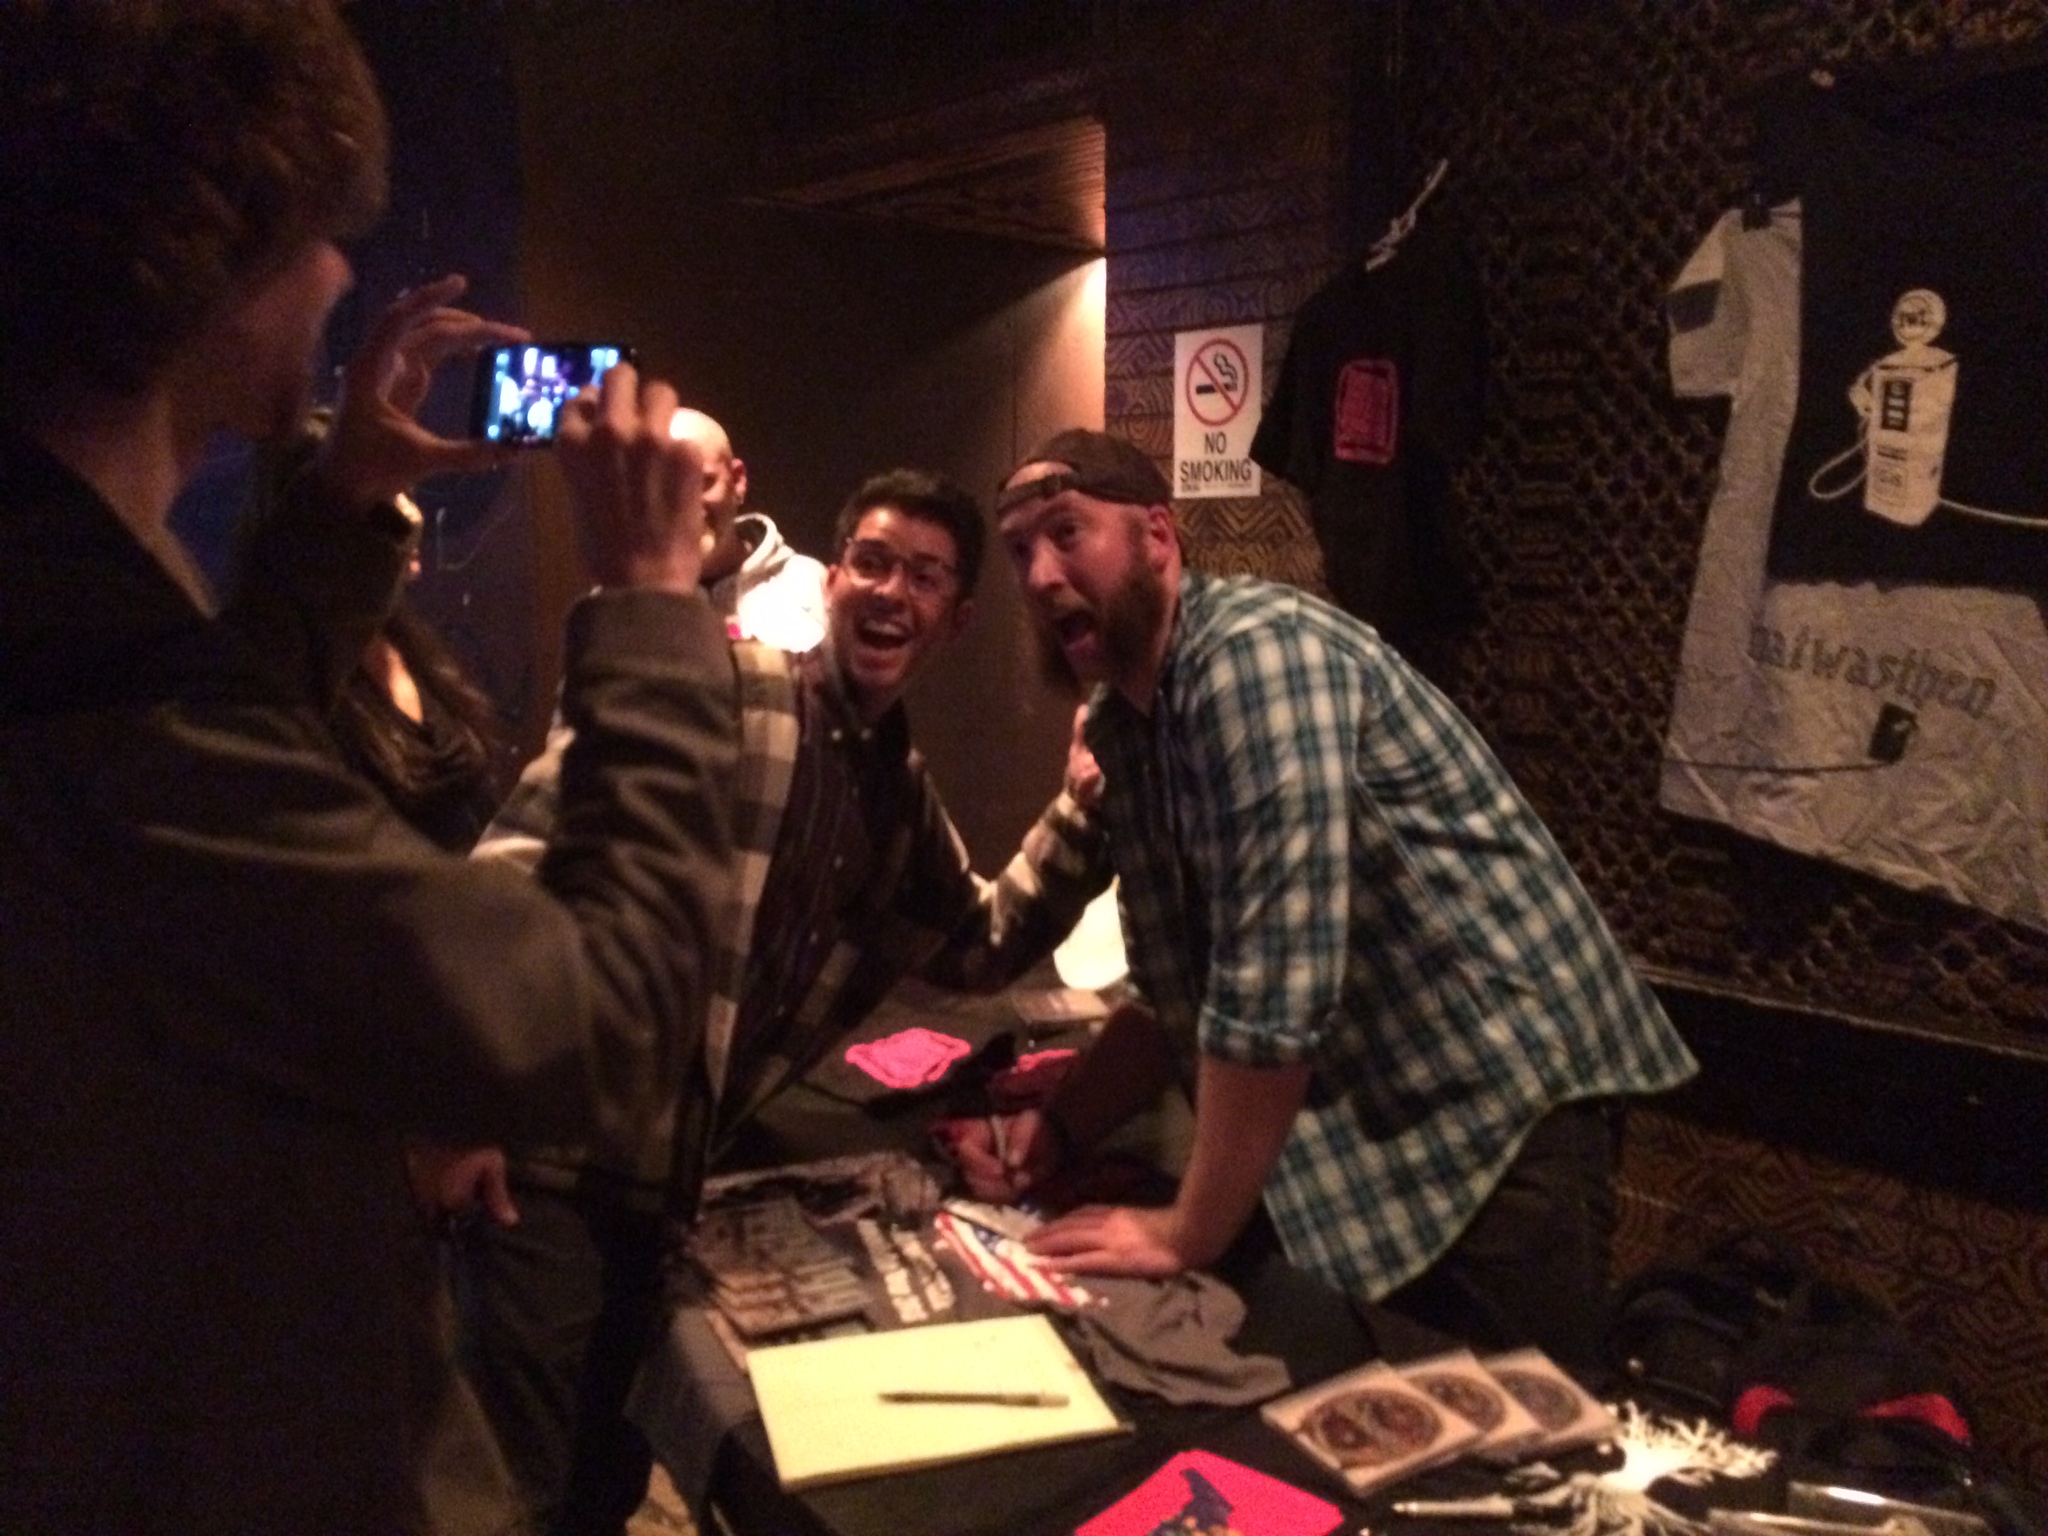 Ben Dukes signs autographs for fans at The House of Blues, November 2013